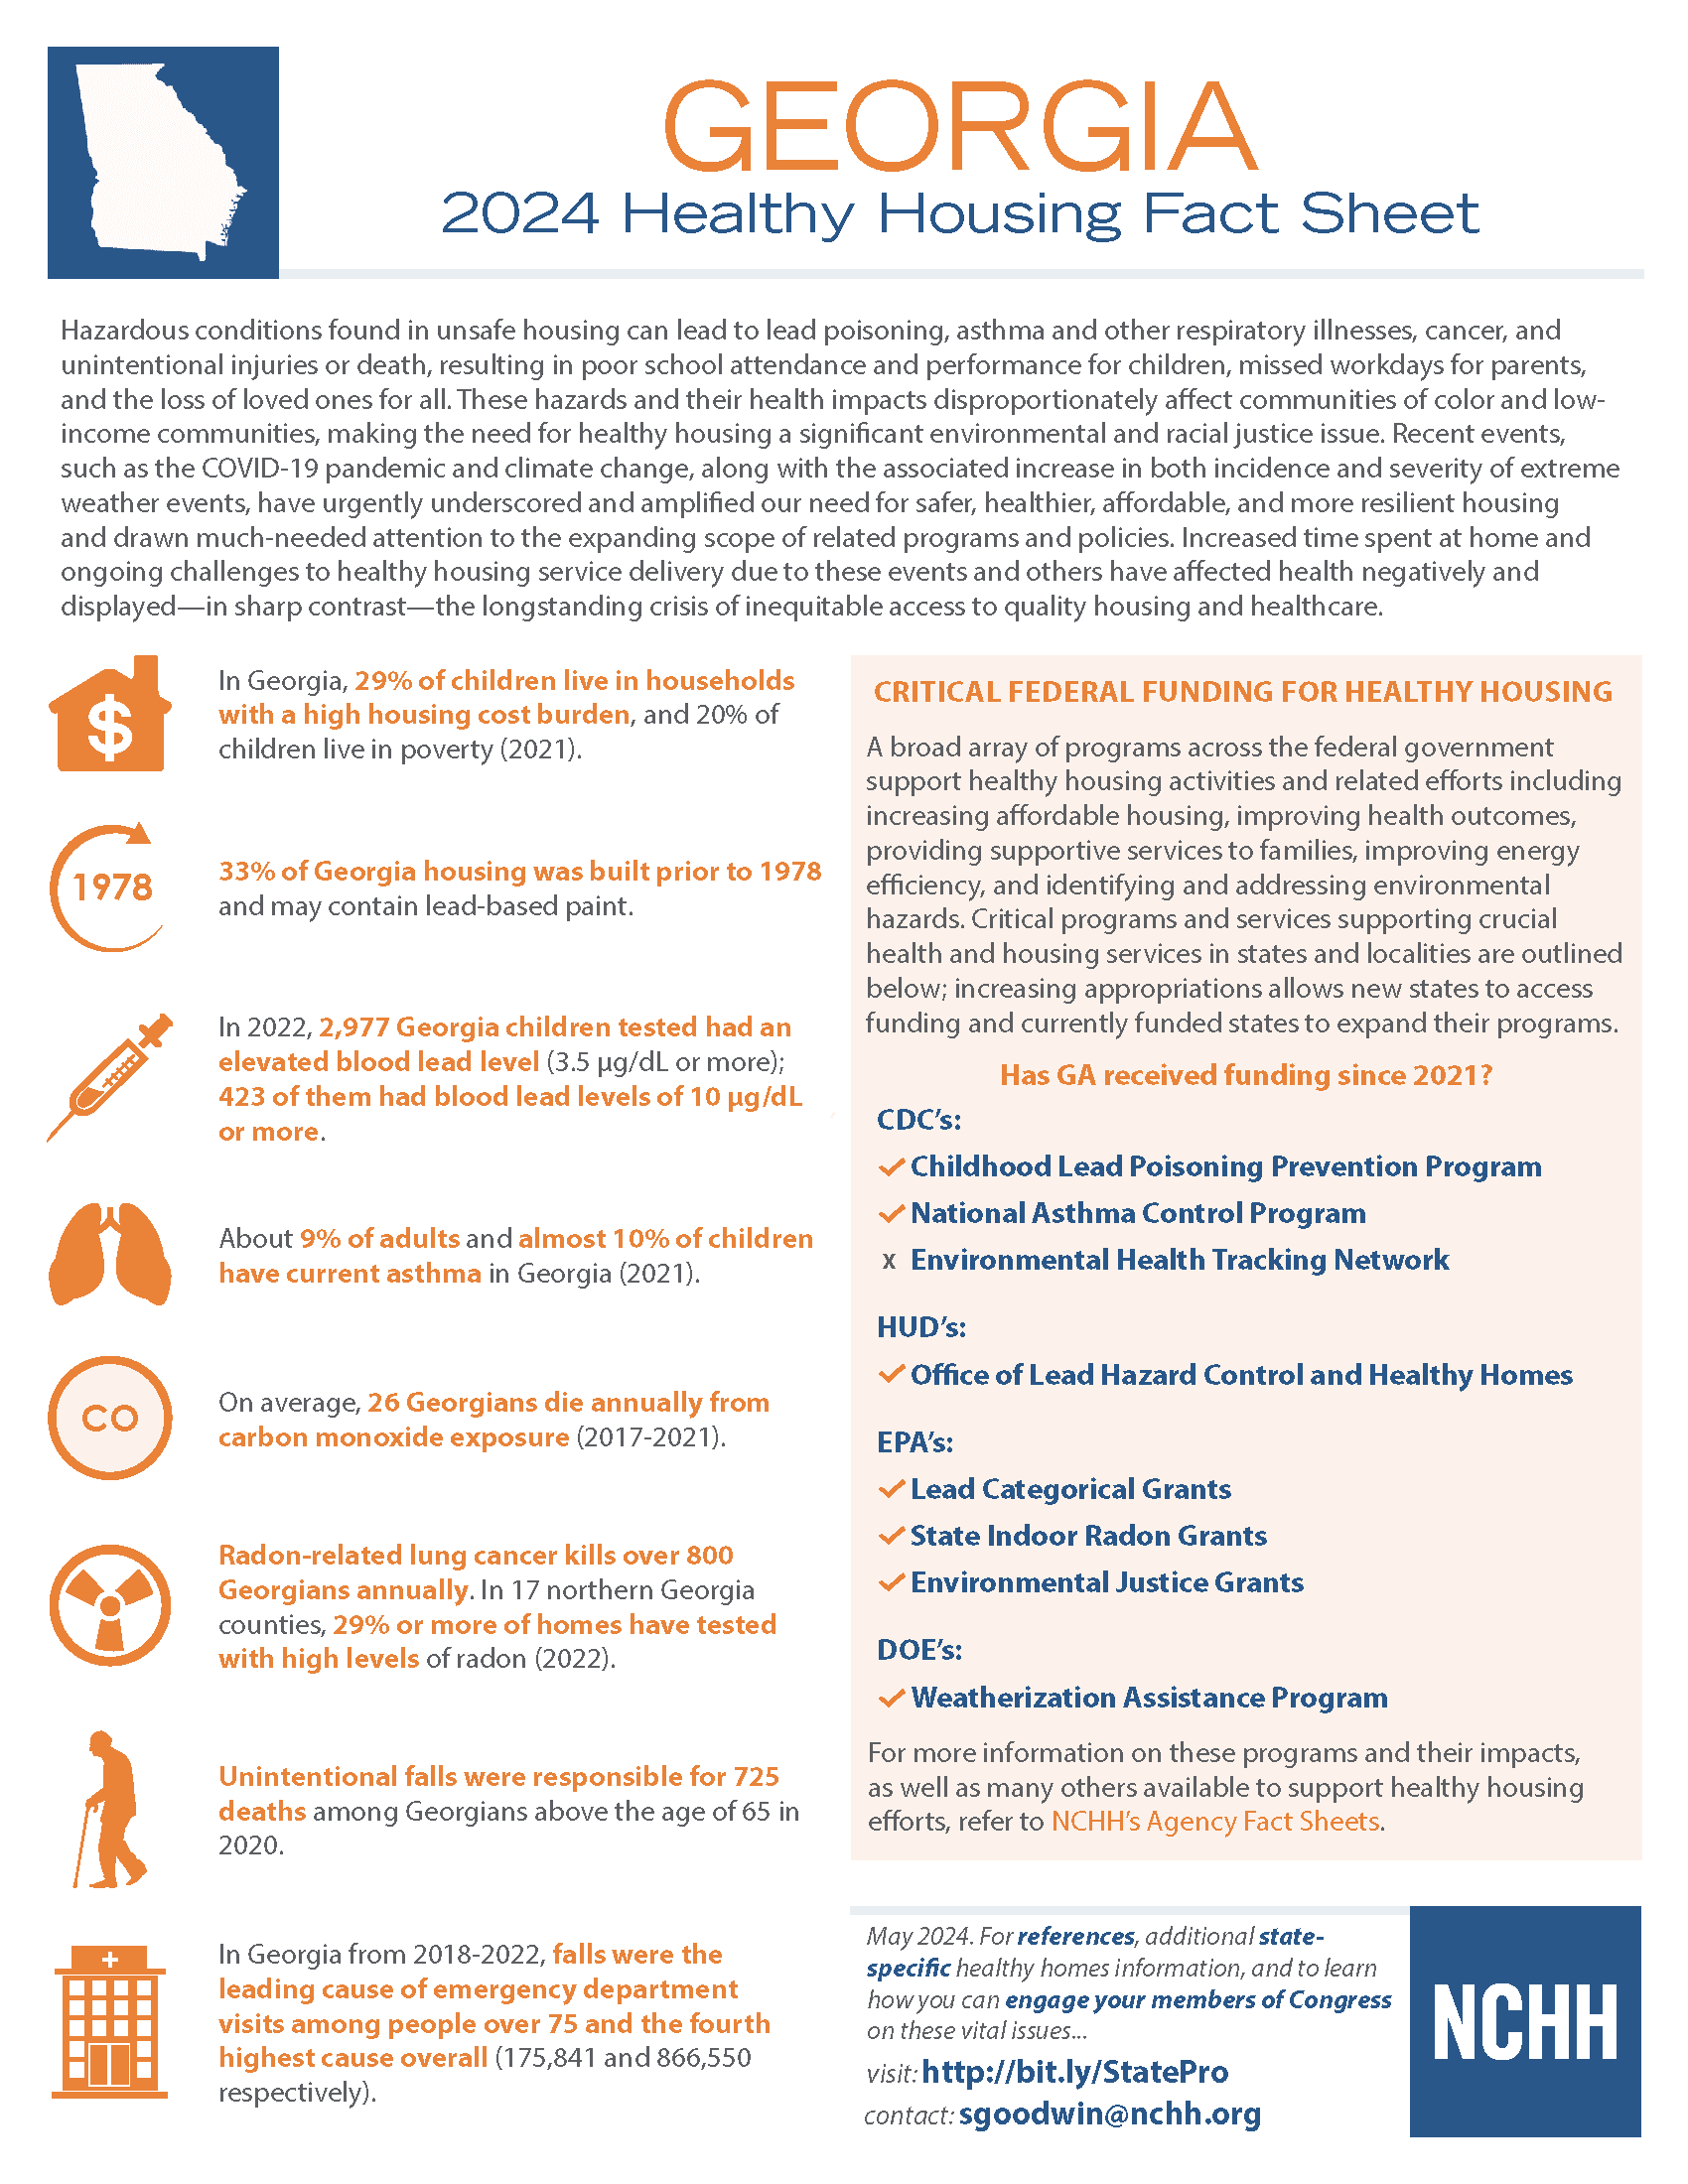 Fact sheet describing the overall environmental health within the state of Georgia.